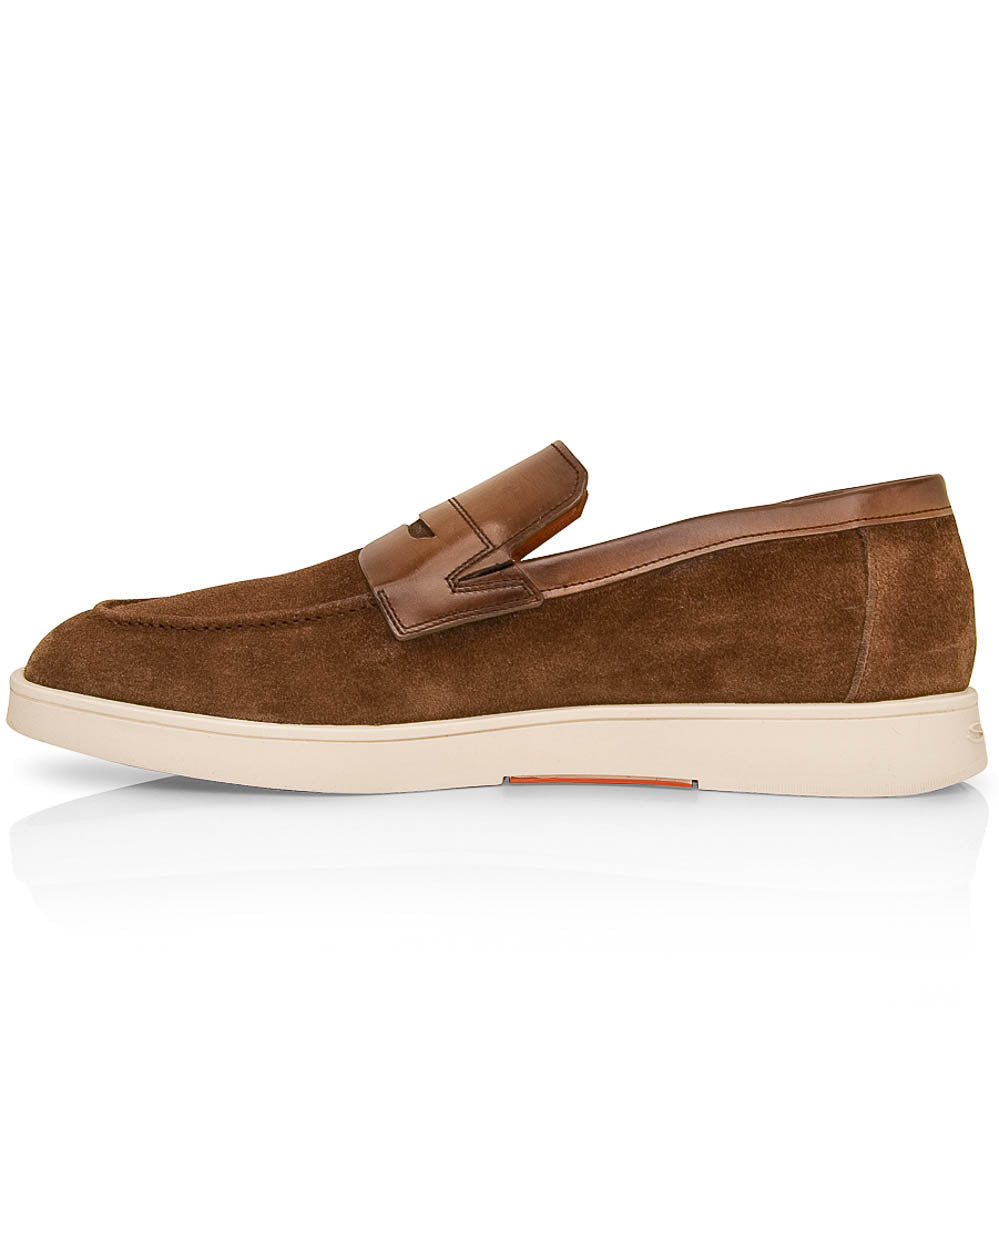 Baba Suede Loafer in Brown